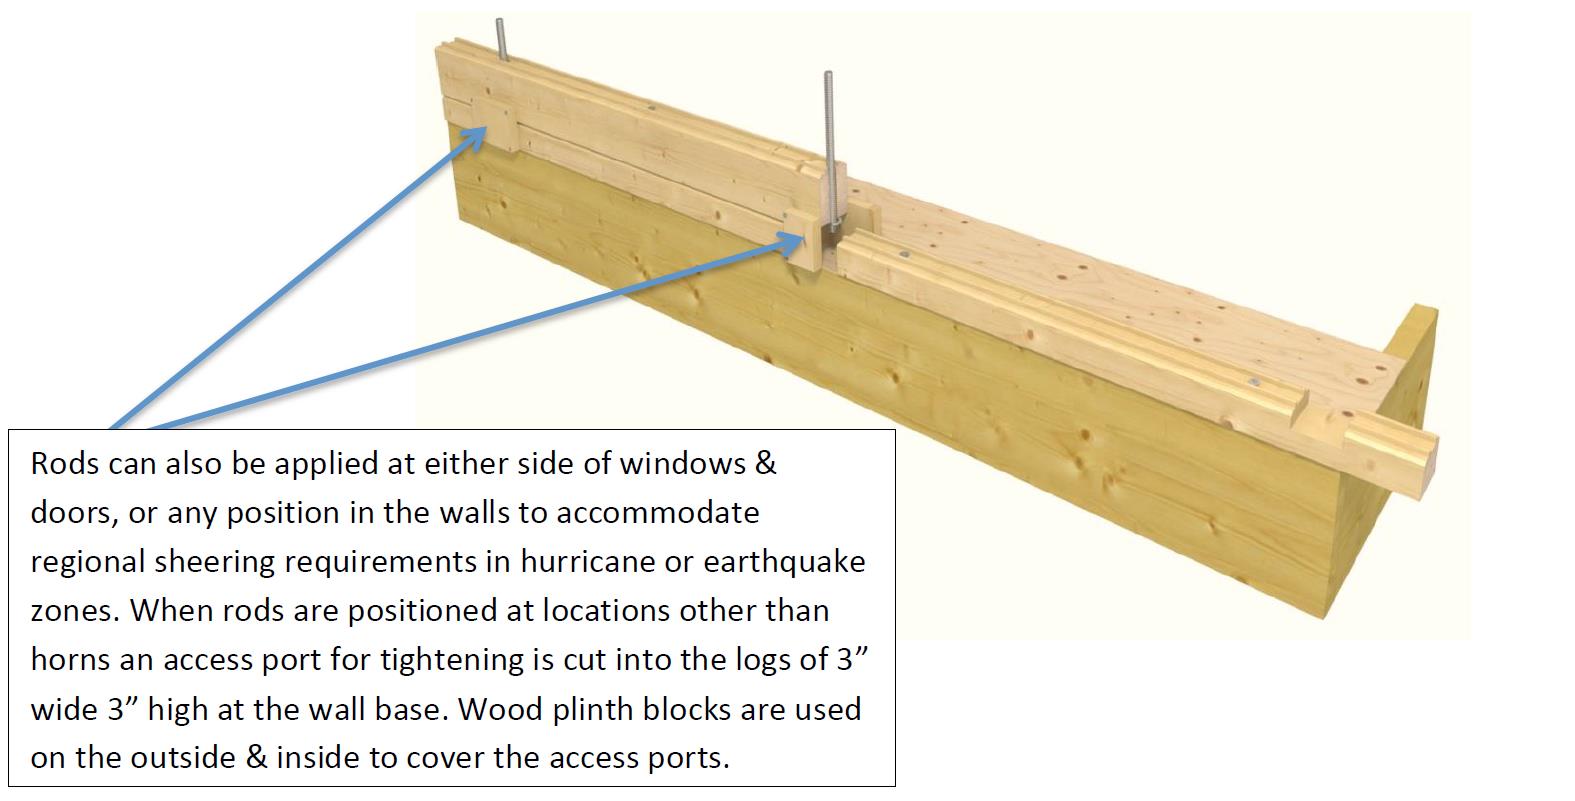 Stacking of wall logs. Rods can also be applied at either side of windows and doors, or any position in the walls to accommodaste regional sheering requirements in hurricane or earthquake zones. When rods are positioned at locations other than horns an access port for tightening is cut into the logs of three inches wide three inches high at the wall base. Wood plinth blocks are used on the outside and inside to cover the access ports. Do it yourself building kits. EZ Log Structures.